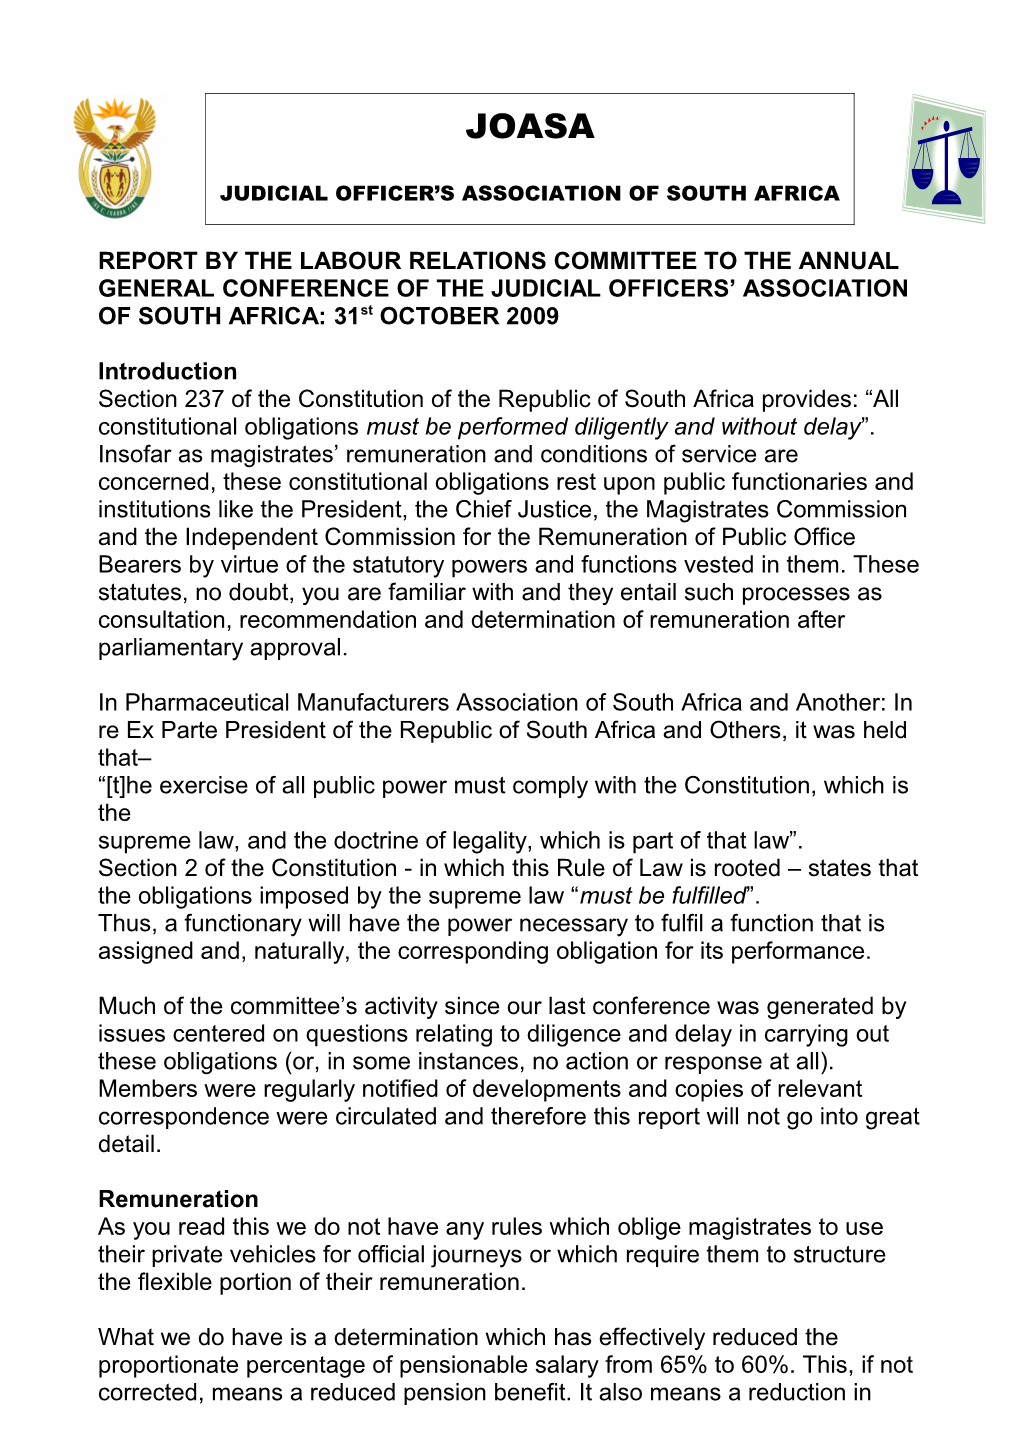 Report by the Labour Relations Committee to the Annual General Conference of the Judicial